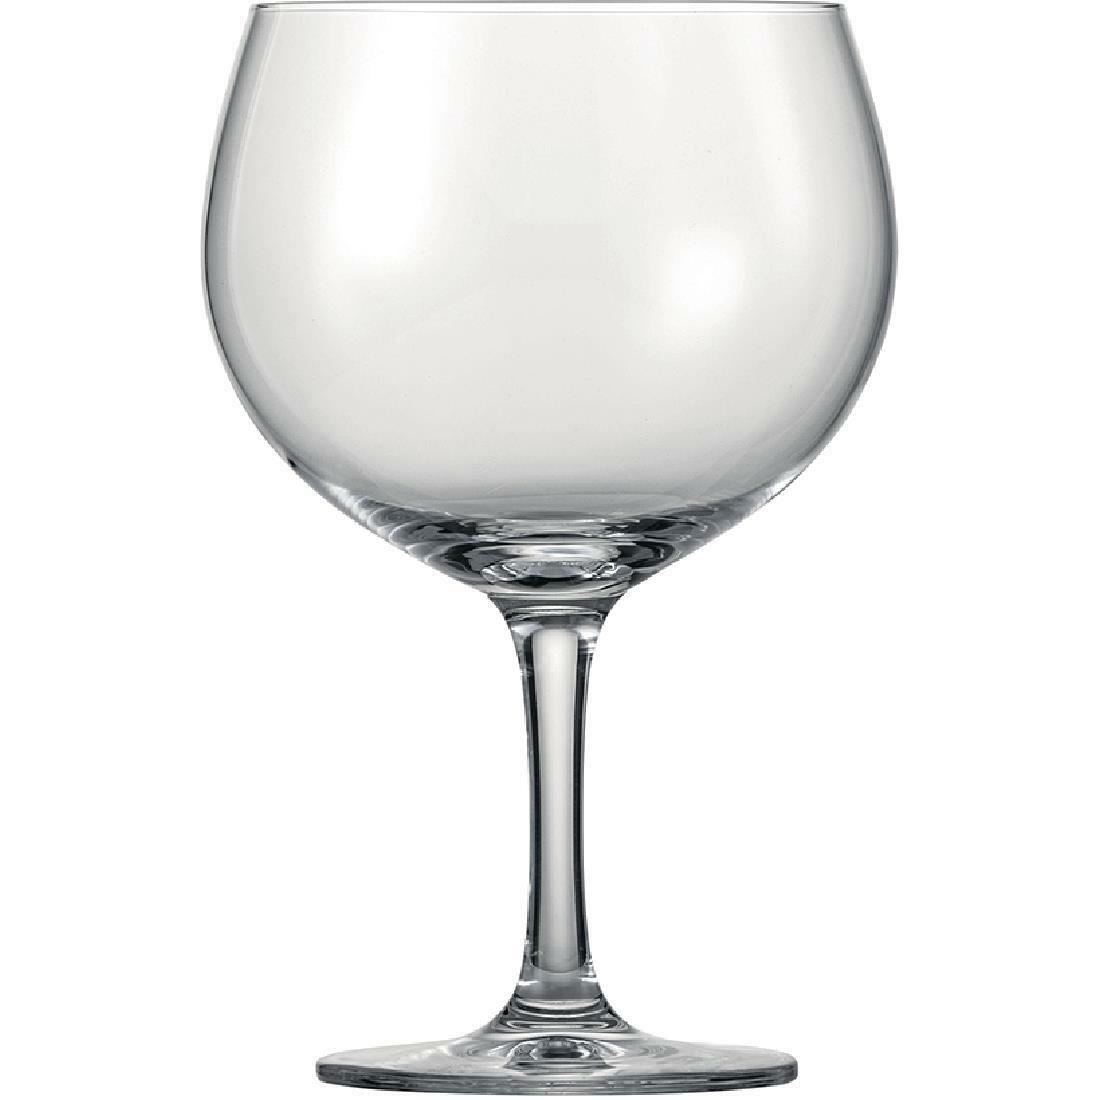 Edge Red Wine Glasses 17.75oz / 520ml from